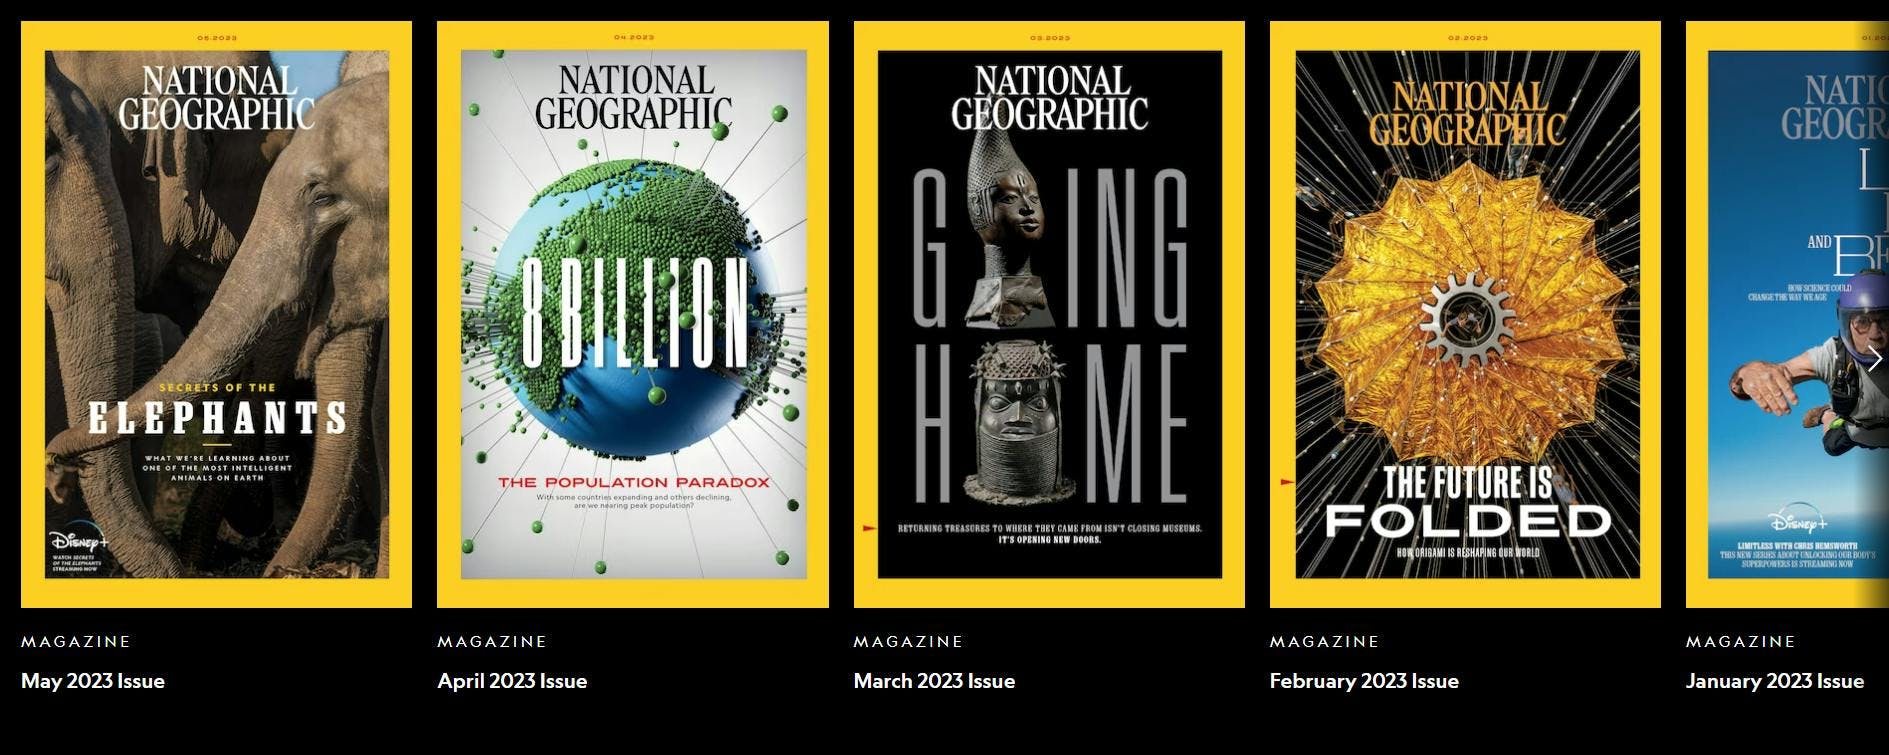 National Geographic covers.